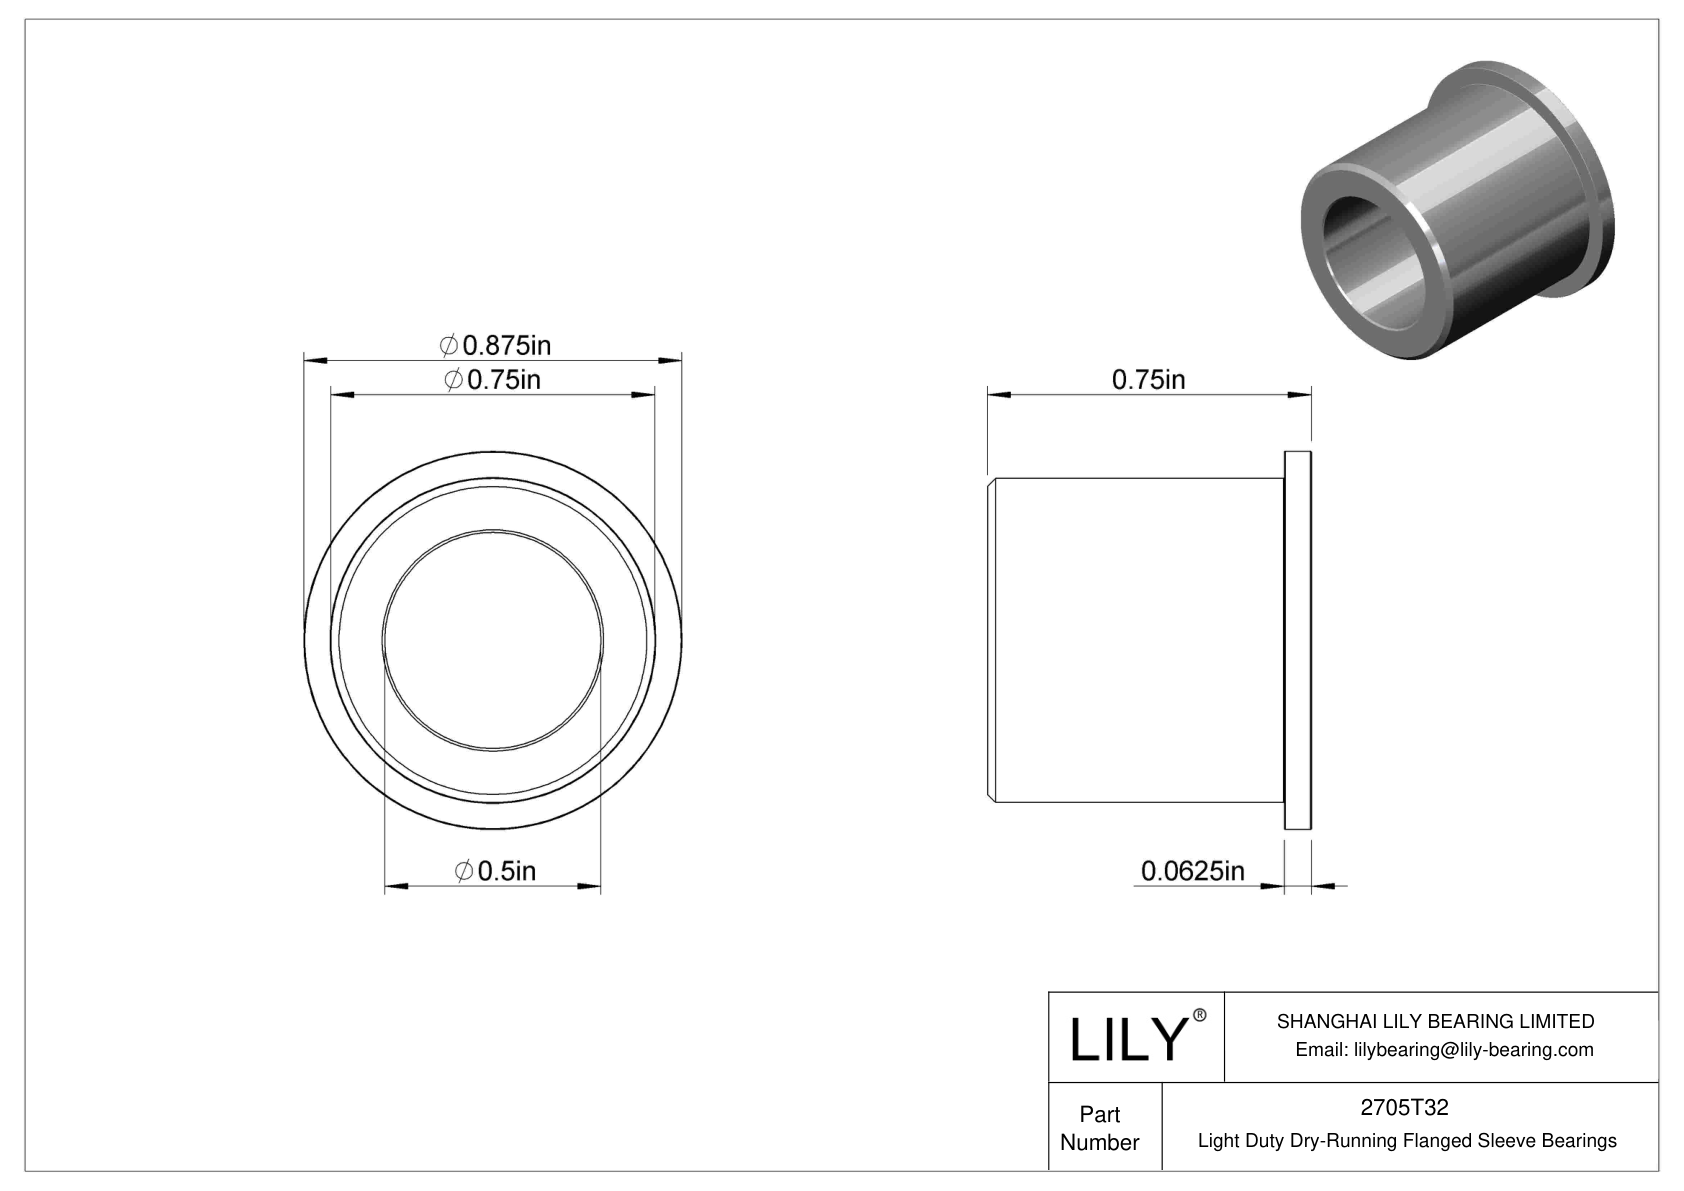 CHAFTDC Light Duty Dry-Running Flanged Sleeve Bearings cad drawing